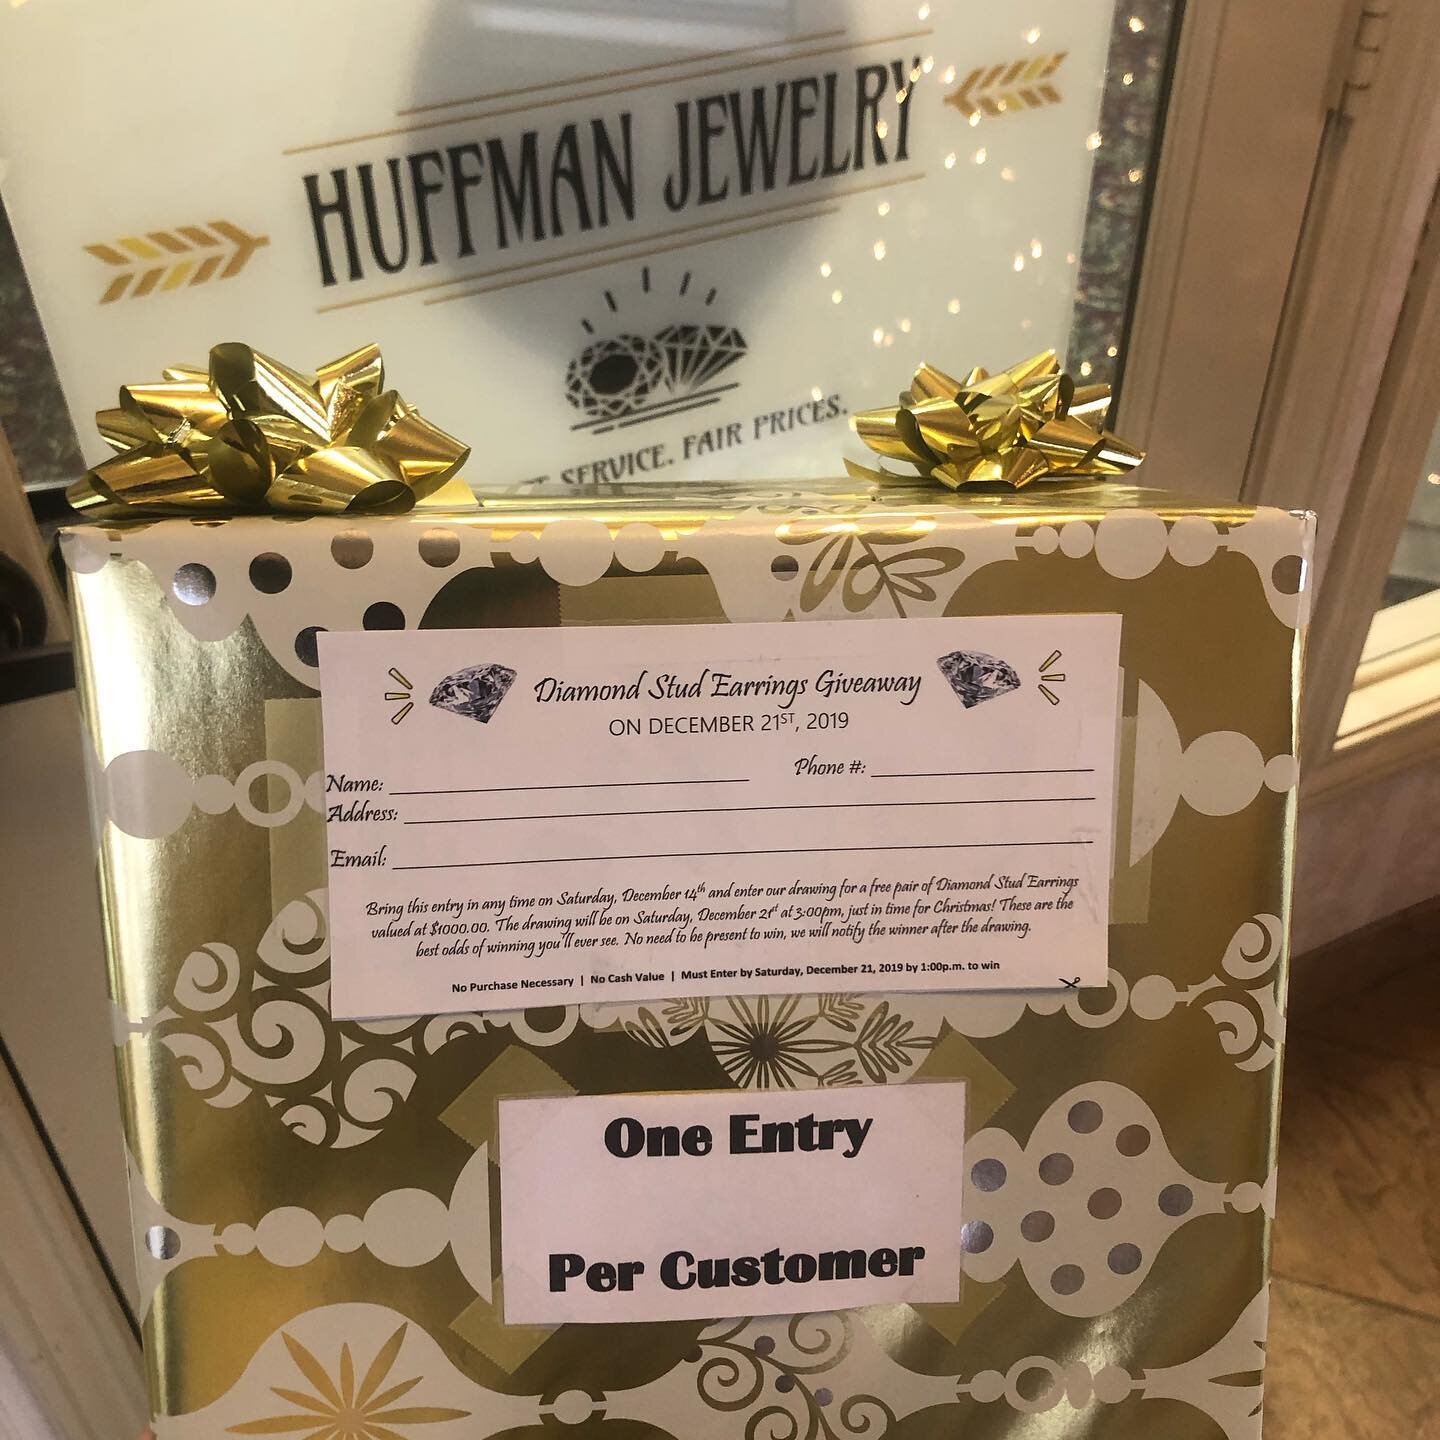 Did you enter our diamond stud earring giveaway?! ITS ALMOST DRAWING TIME!!! Who&rsquo;s our lucky winner gunna be?! 💍💎 #diamondearringgiveaway #diamondgiveaway #jewelryrepair #jewelry #webuygold #earrings #customerappreciation #luckywinner #drawin